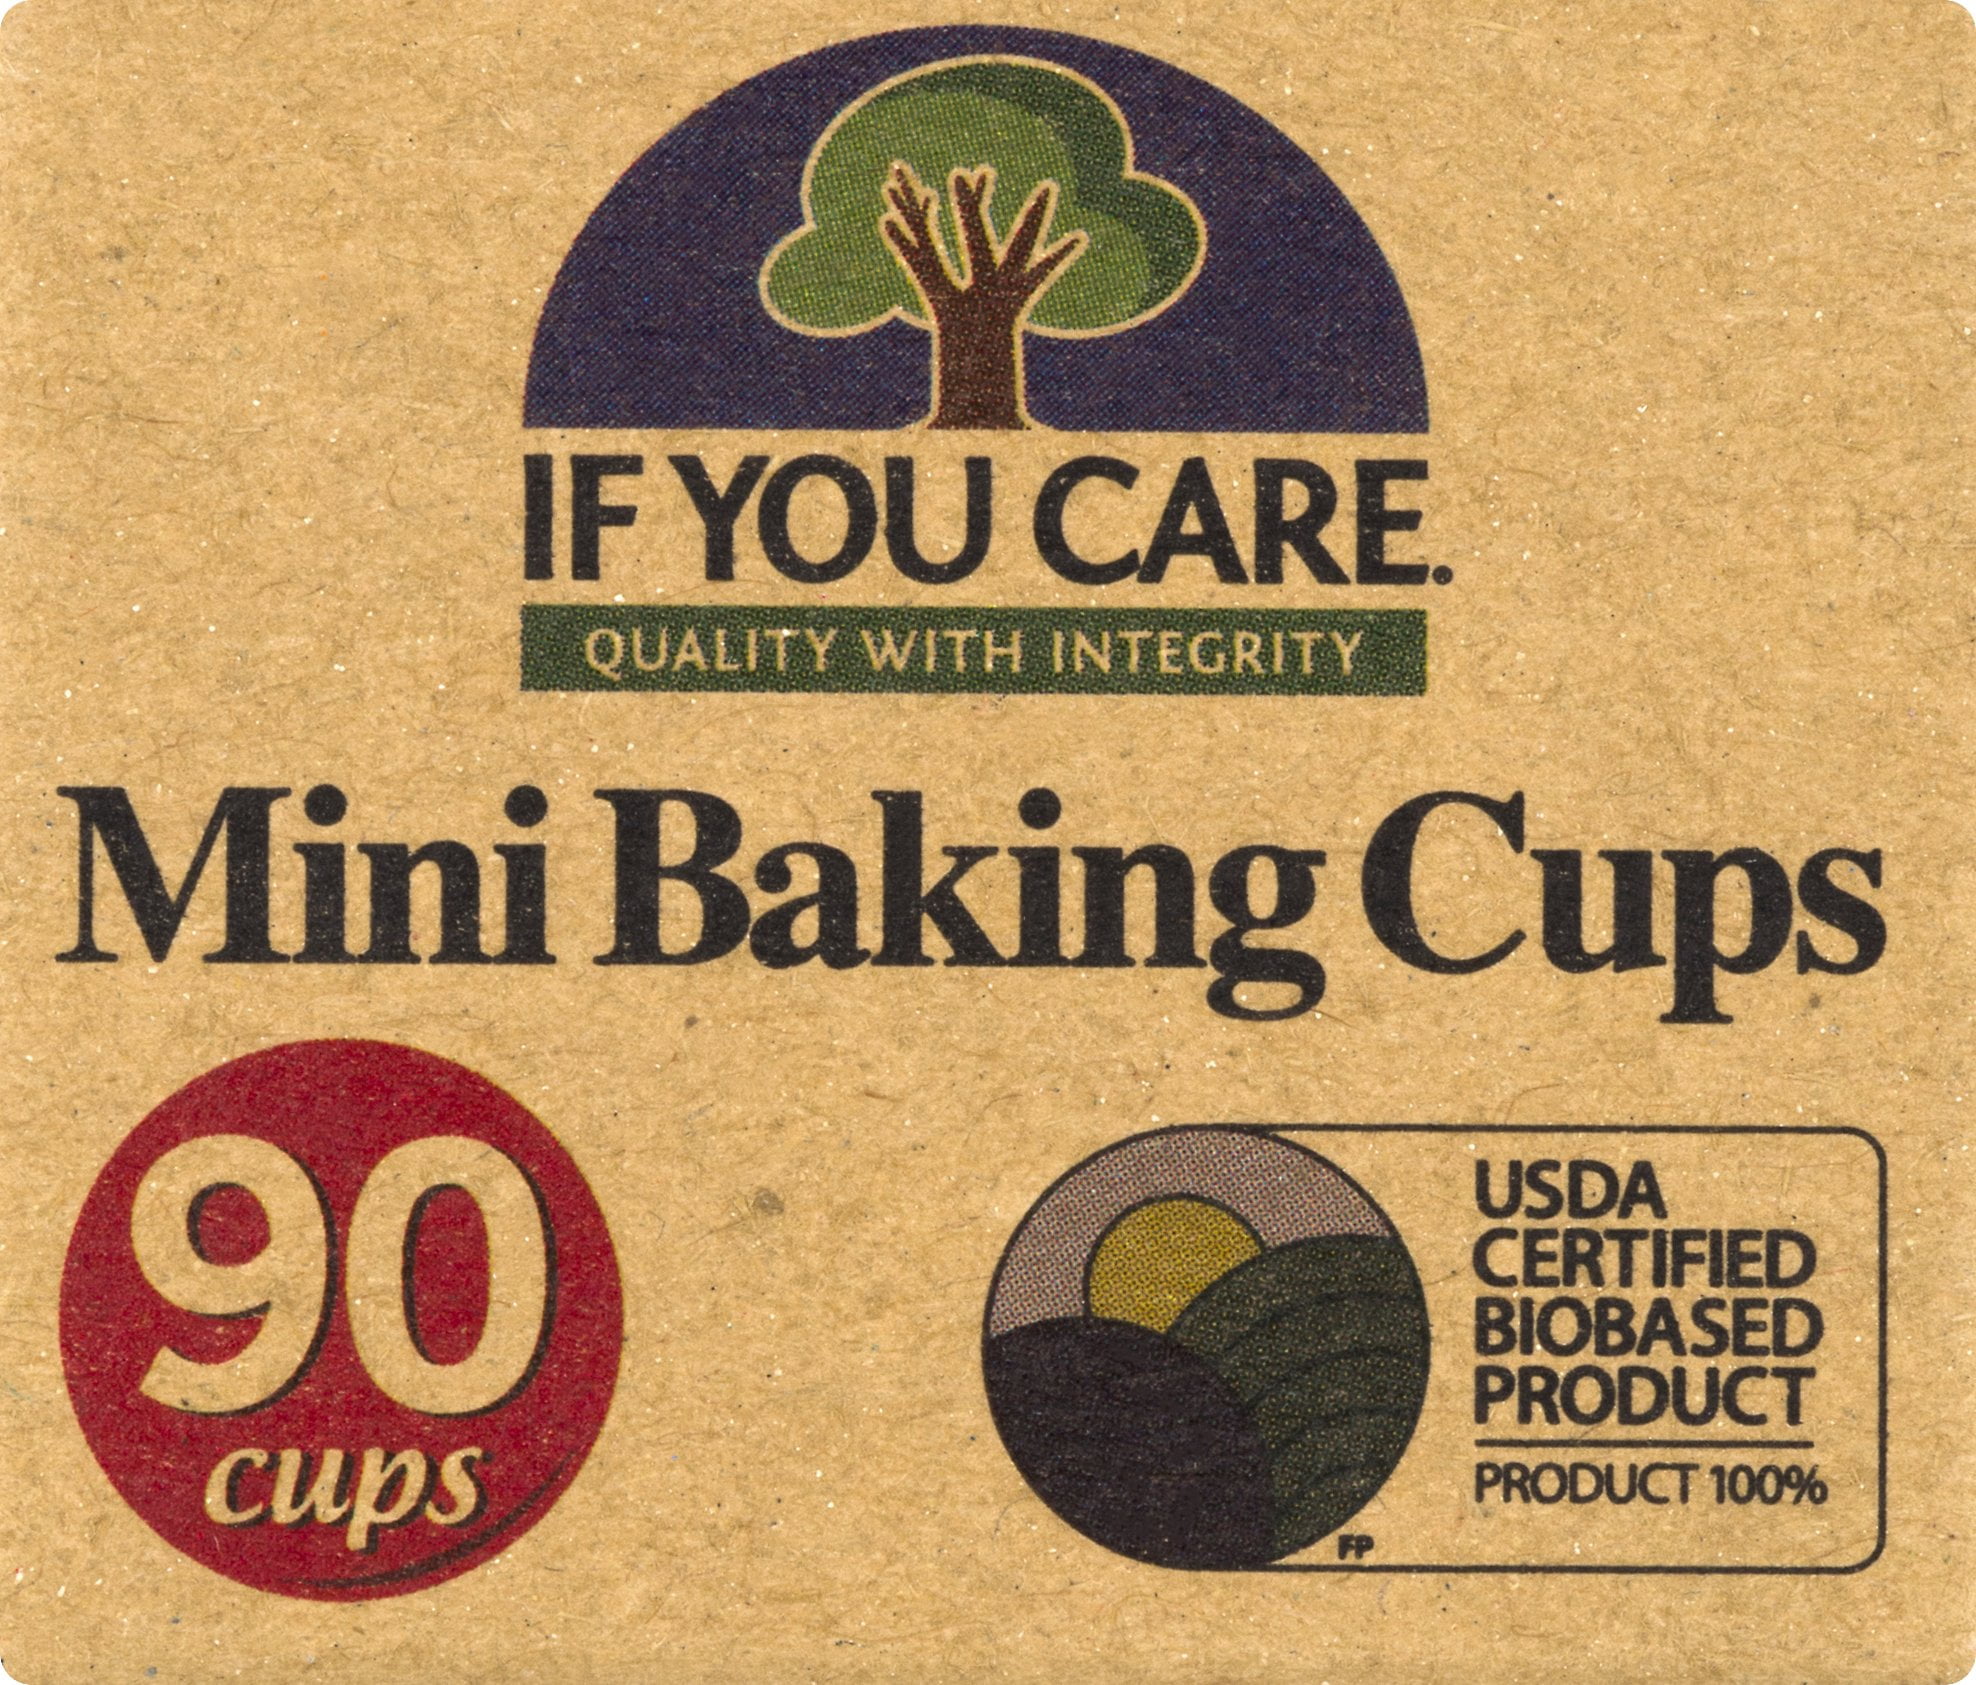 If You Care Baking Cup Jumbo 24 Pc3